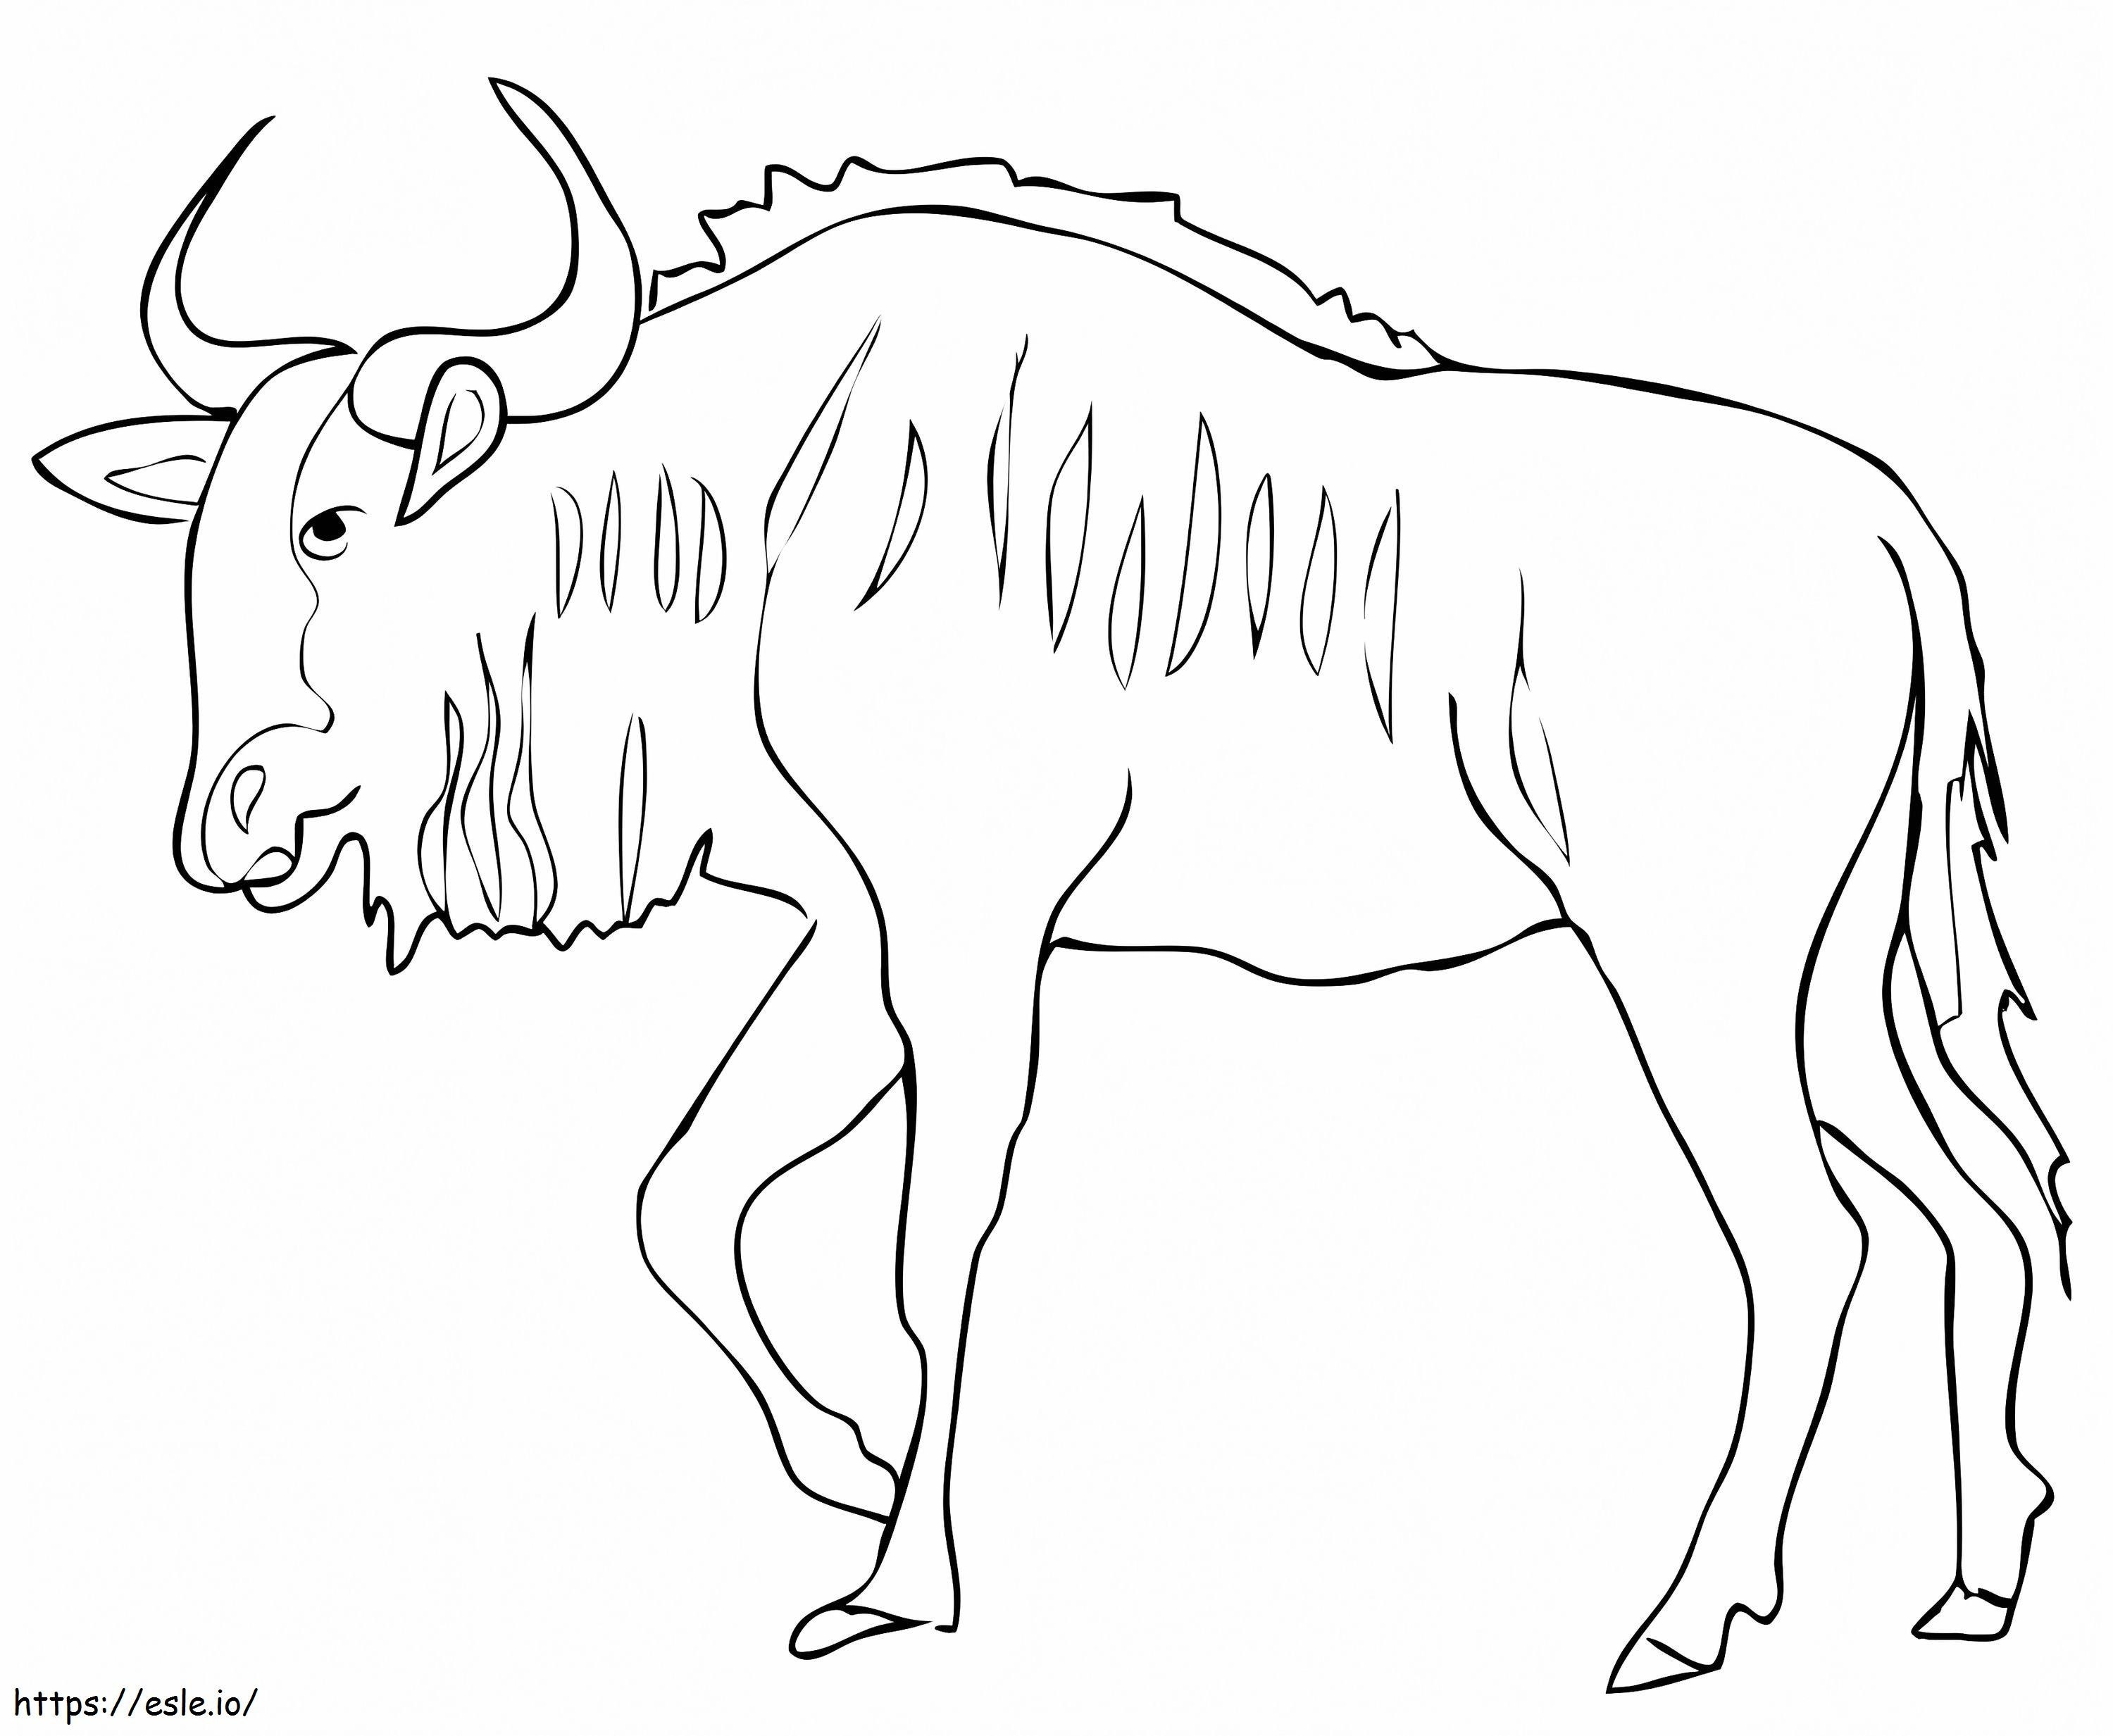 Normal Blue Wildebeest coloring page